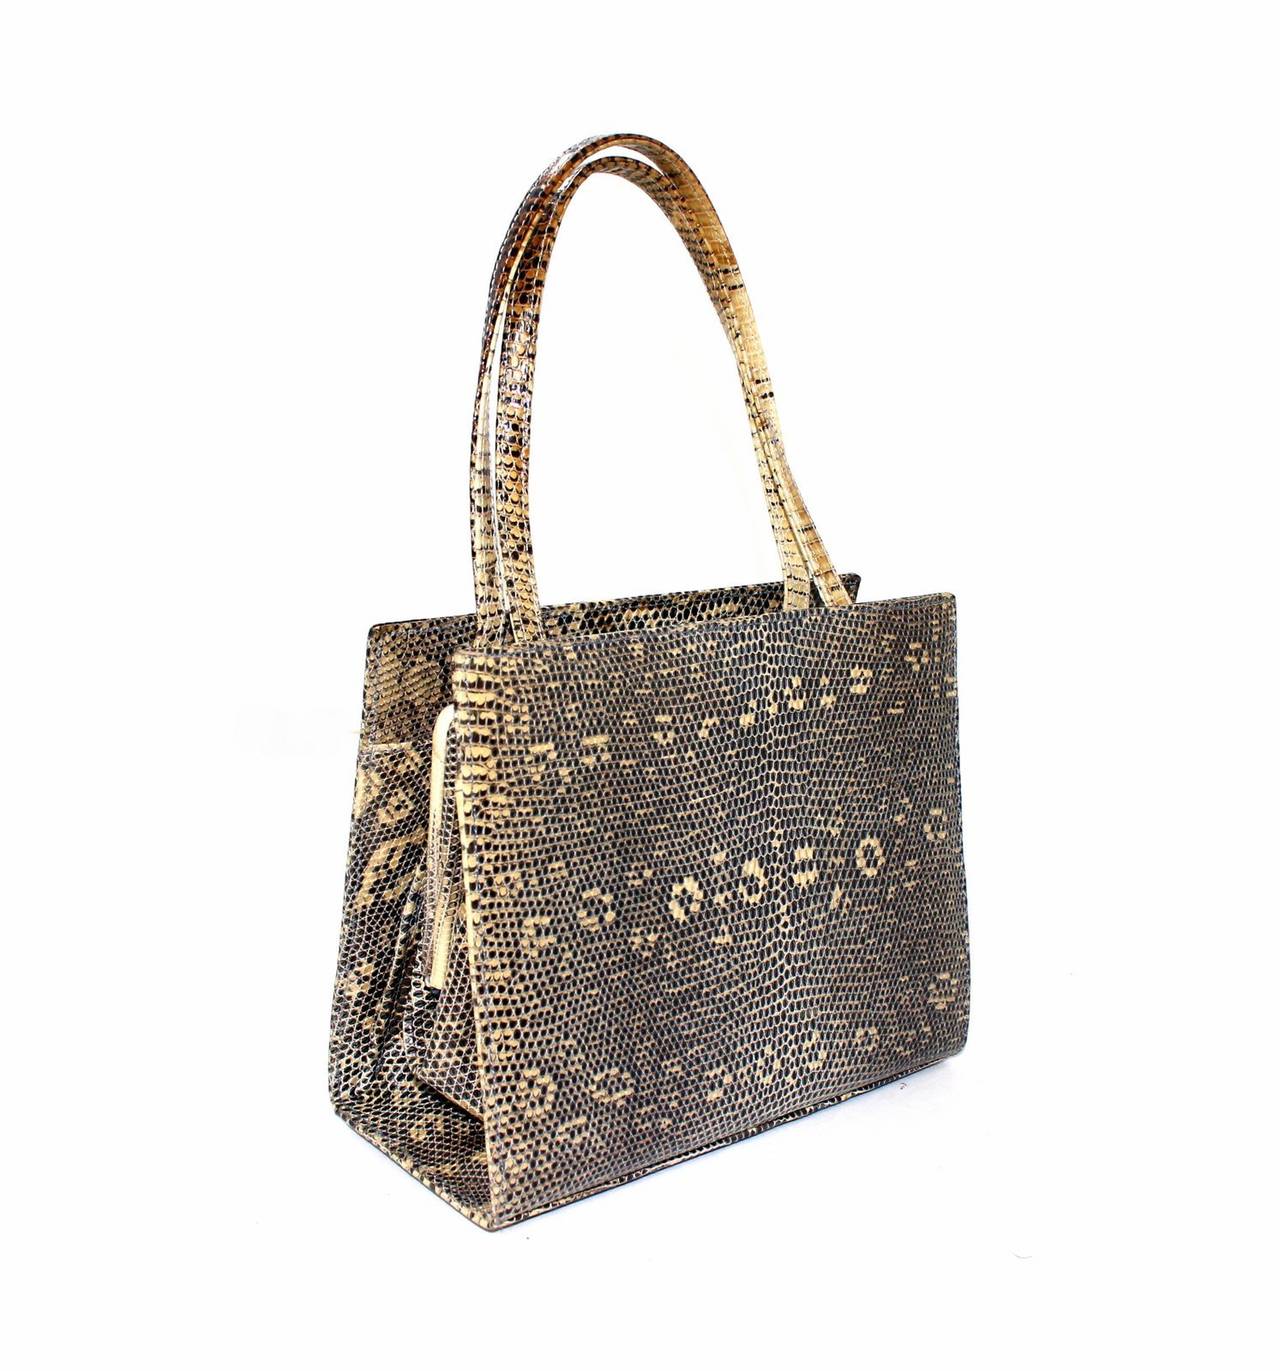 Lambertson Truex Grey and Beige Lizard Handbag-  MINT Original retail $500.00.
Grey and beige lizard skin small bag has silver tone LT hardware accents.  Framed central compartment accesses the light blue leather interior.  Double handles are